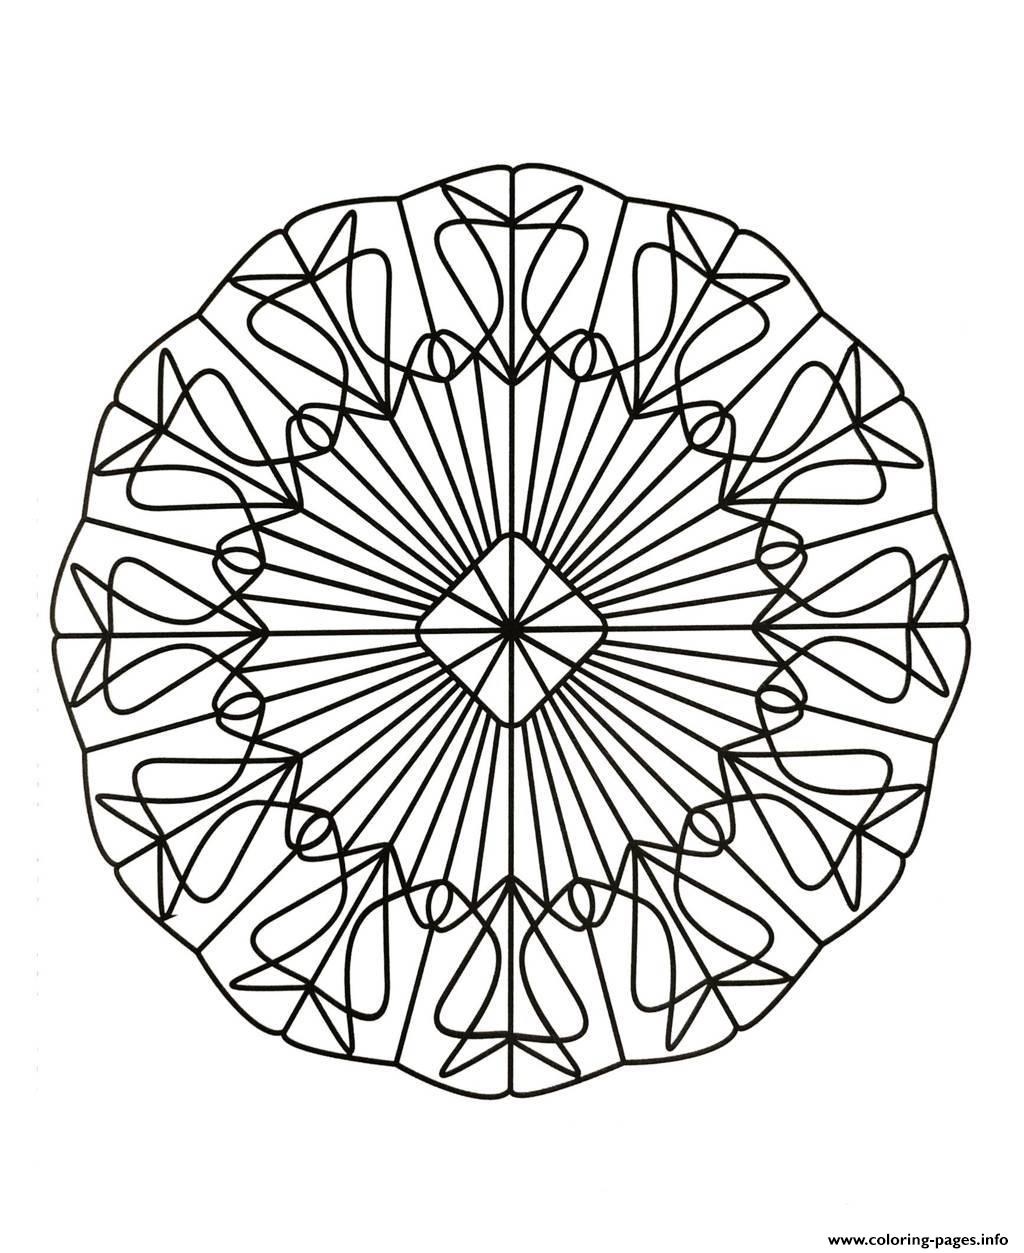 Mandalas To Download For Free 2  coloring